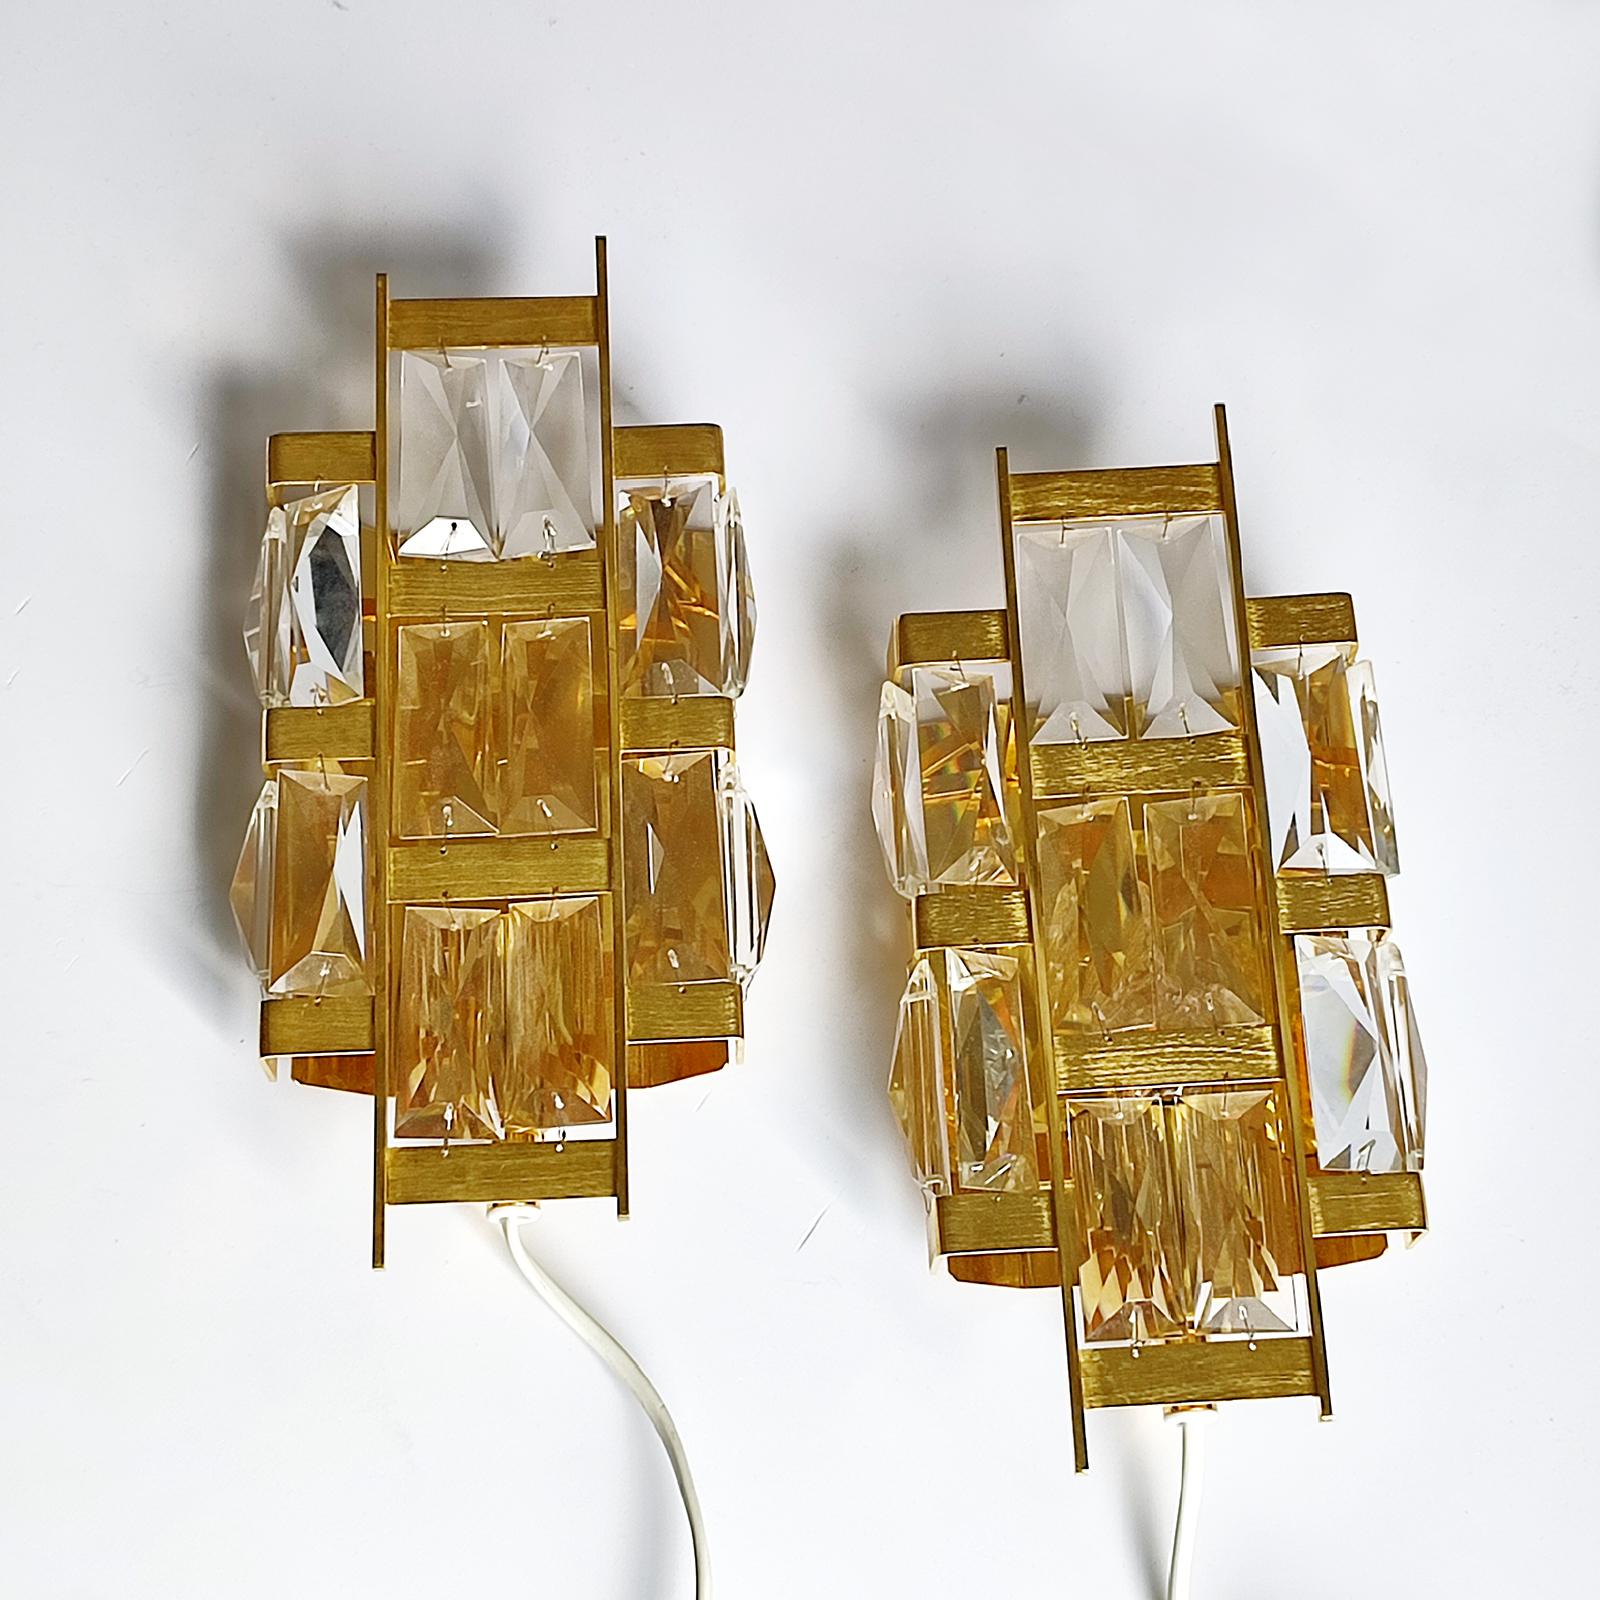 Exquisite and rare wall lamps from the 1960s.
Made of gold-plated brass and rectangular faceted crystal petals to give a very pleasant lighting effect.
The brass body is detailed worked, showing a deep brushed structure.
Excitingly beautiful design